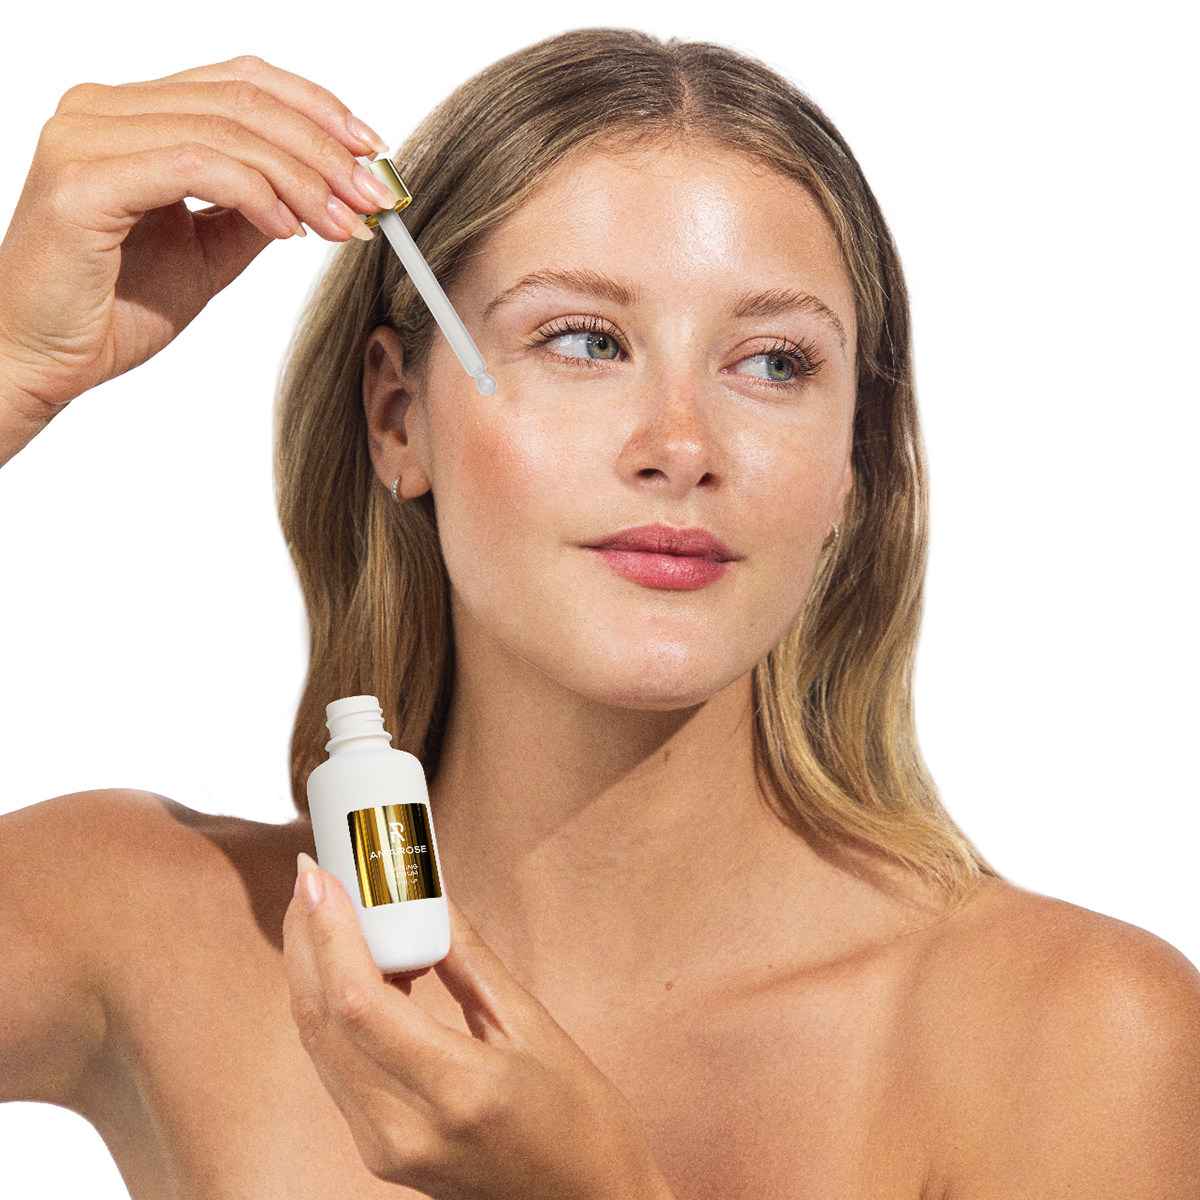 Top 22 Natural Skin Care Products & Tools To Sculpt & Beautify Aging Skin